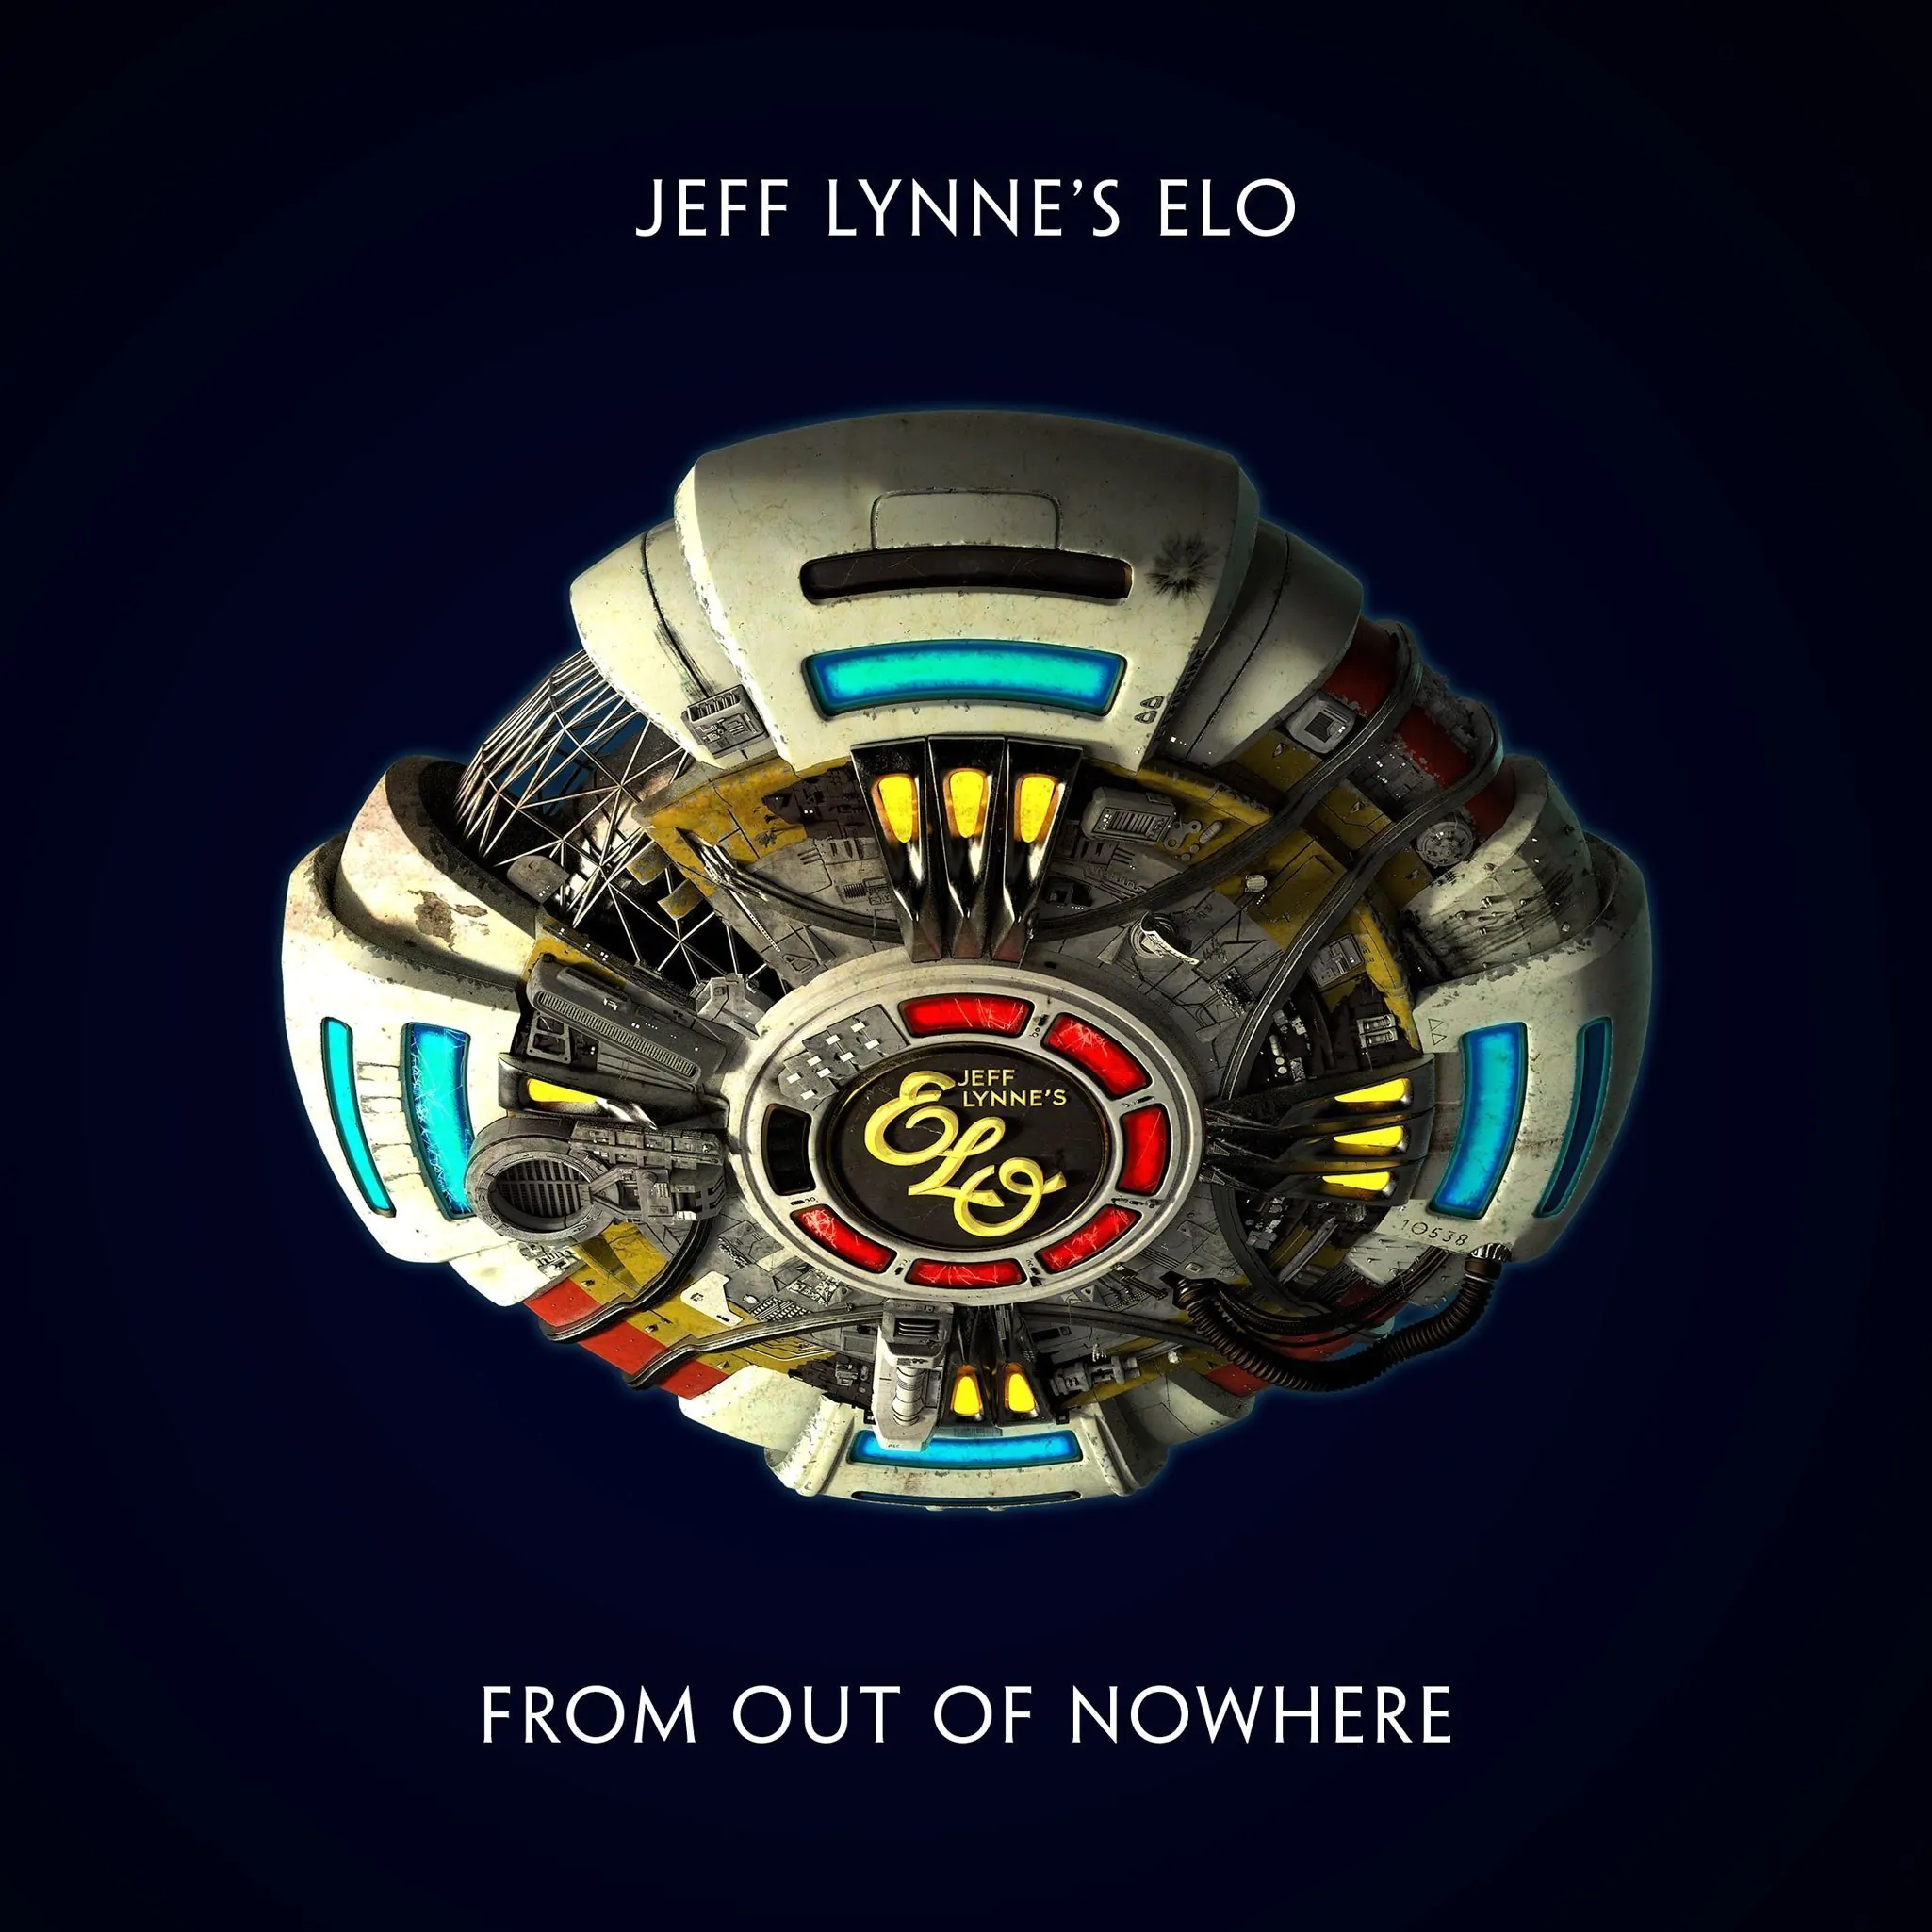 JEFF LYNNE’S ELO set to release new album, ‘From Out of Nowhere’ on November 1st